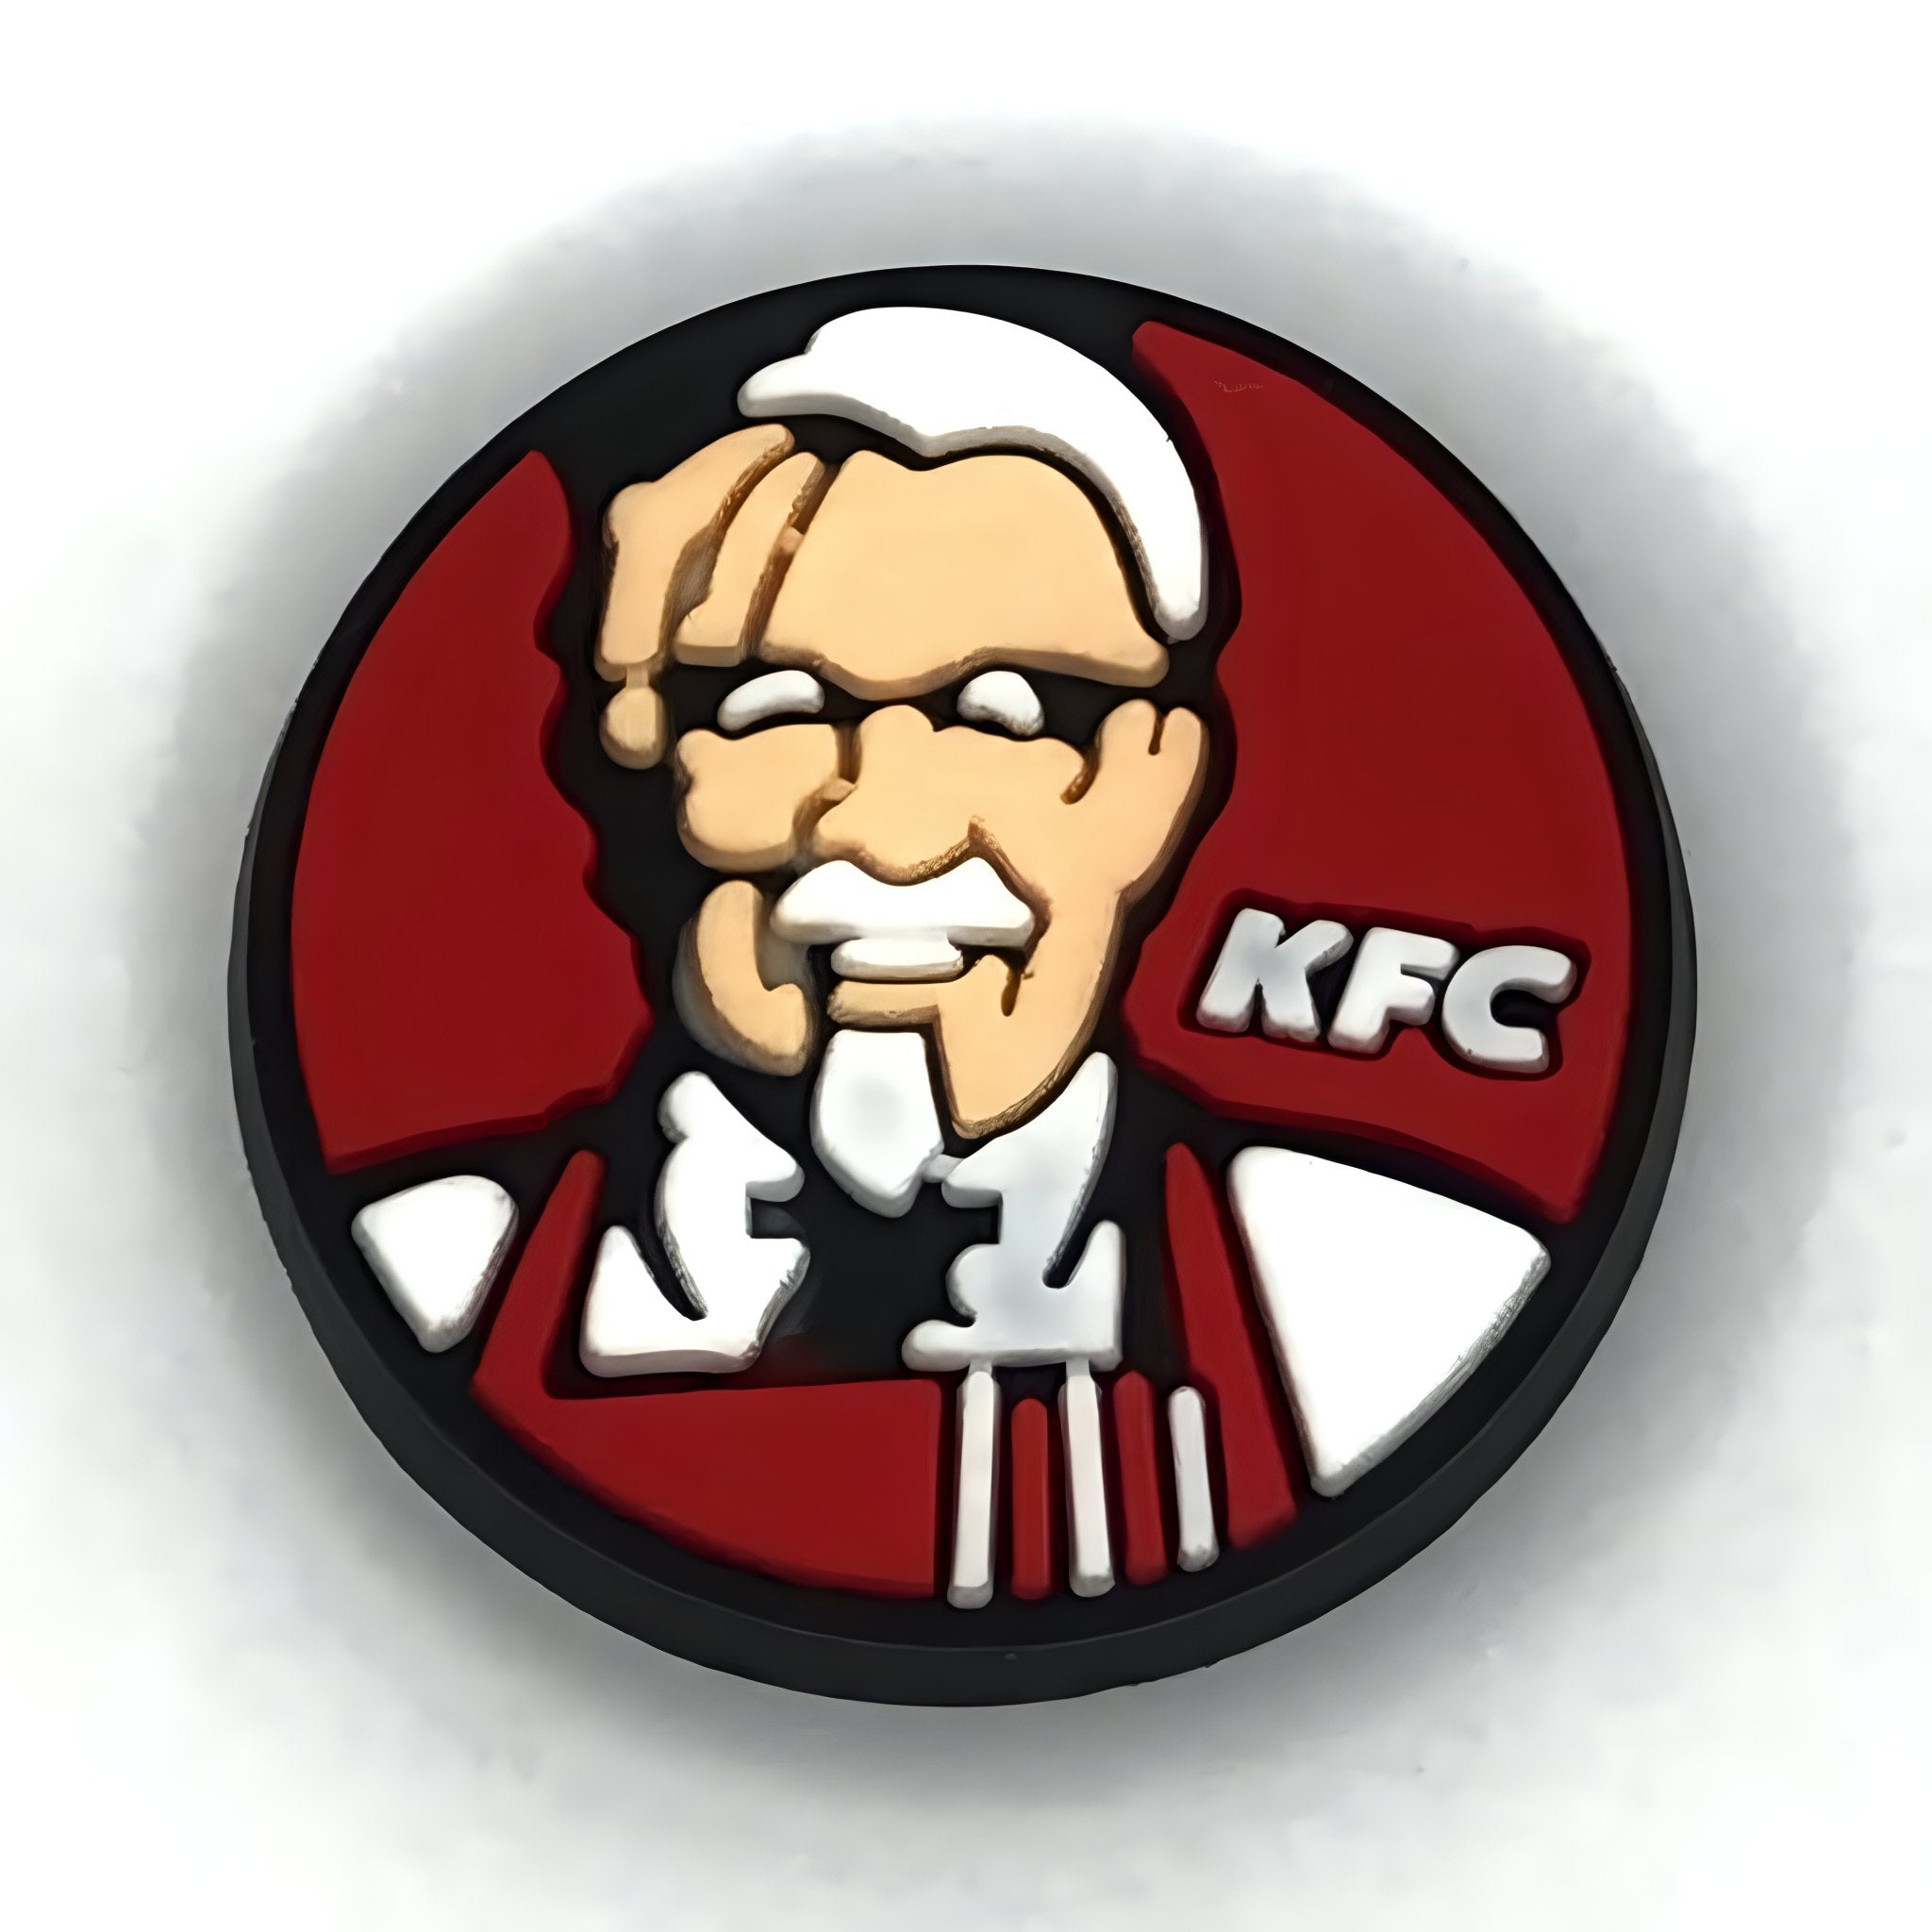 "KFC Shoe Charm 🍗: Finger-Lickin' Good Style!" - Questsole